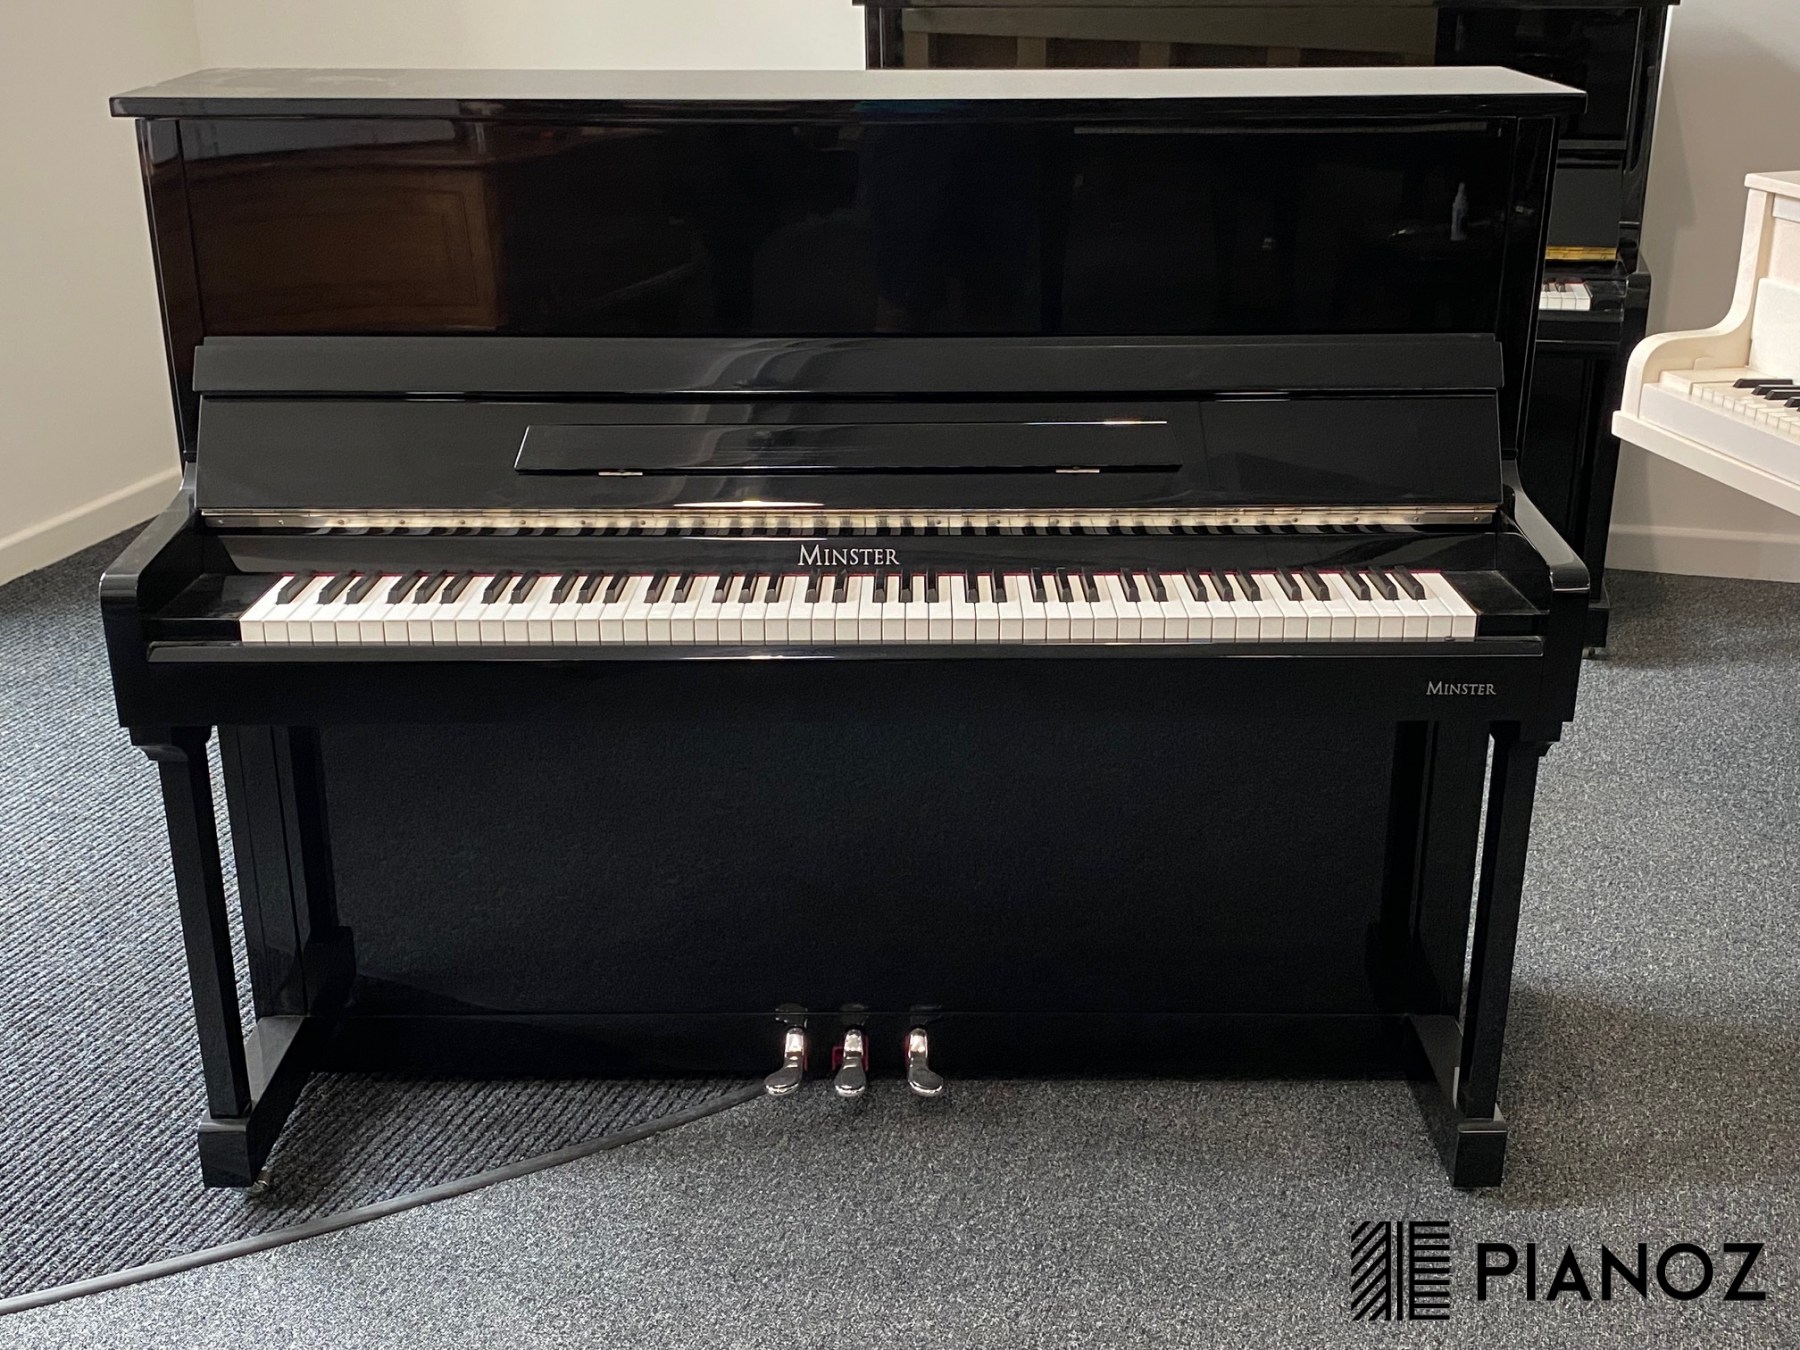 Minster RX120 Upright Piano piano for sale in UK